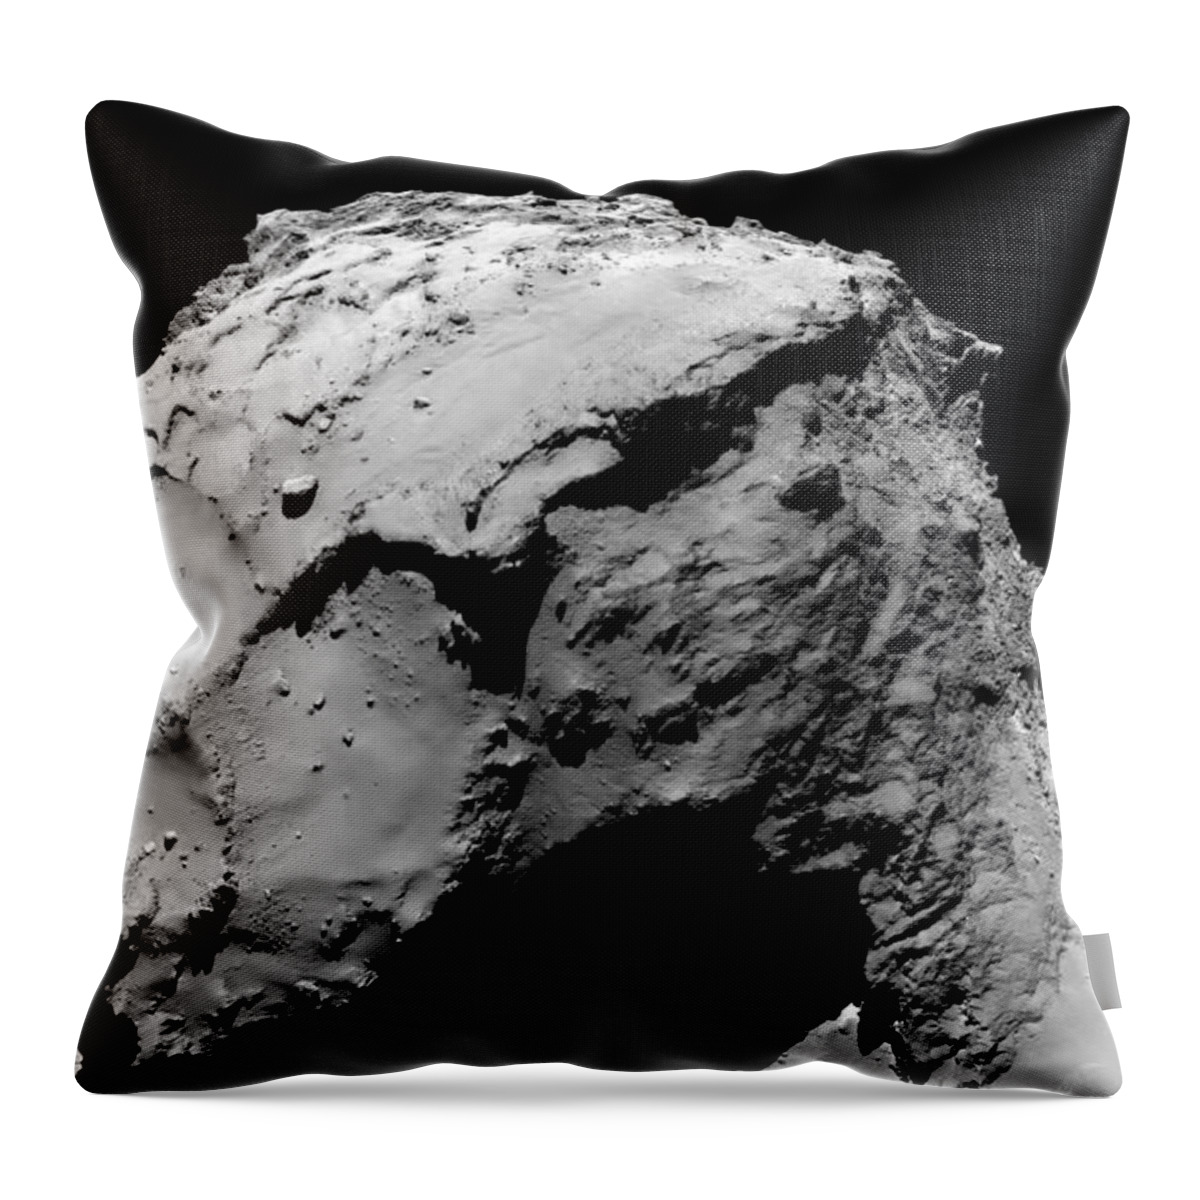 Comet Throw Pillow featuring the photograph Comet 67pchuryumov-gerasimenko #9 by Science Source